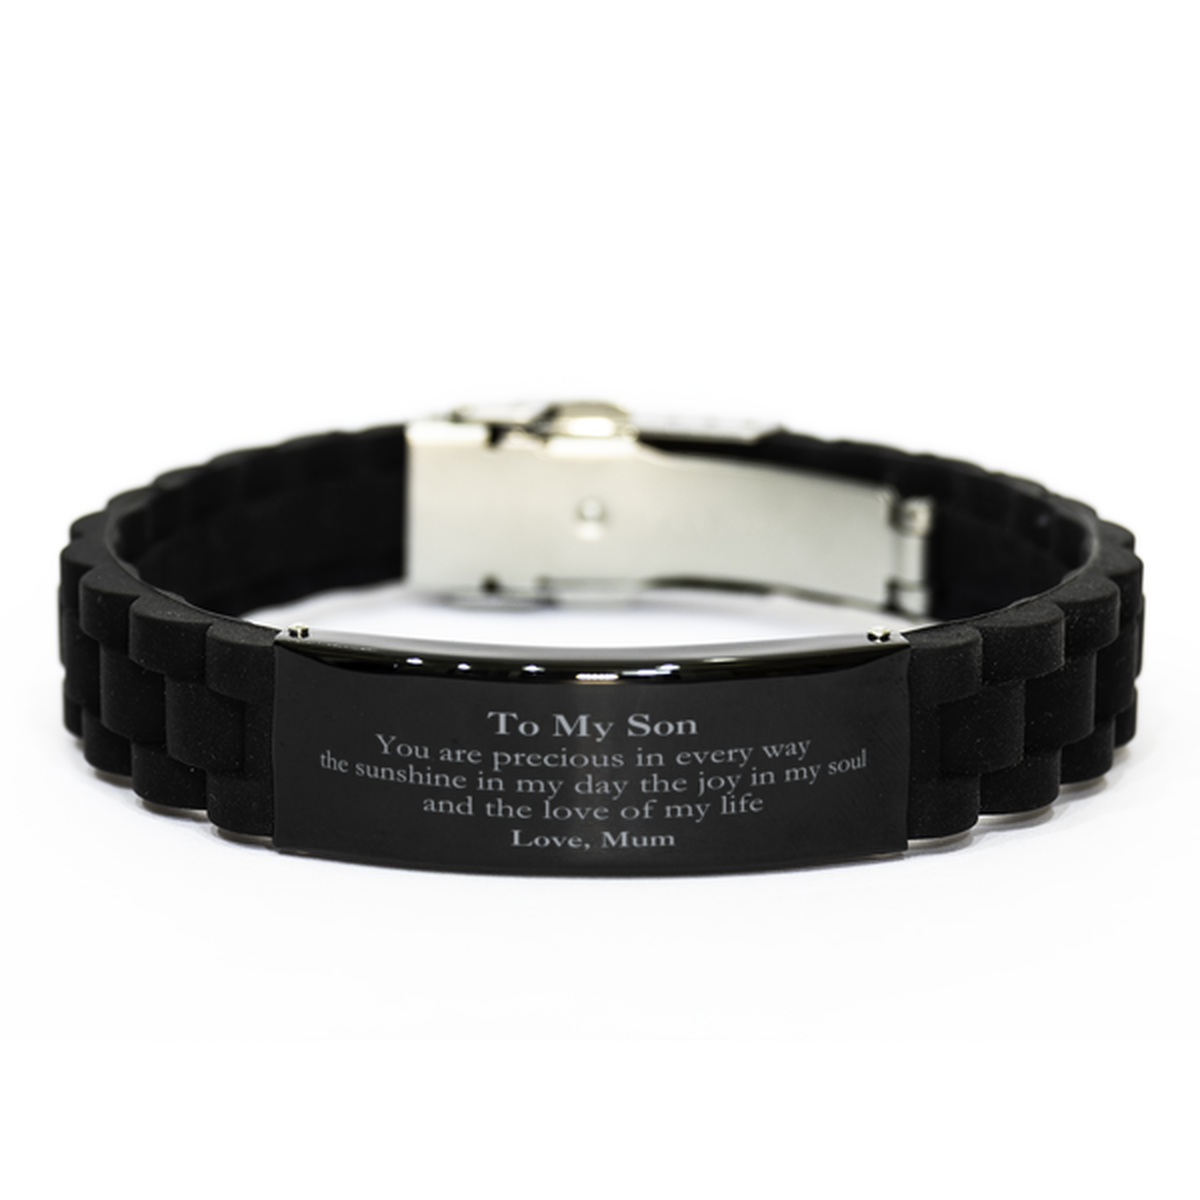 Graduation Gifts for Son Black Glidelock Clasp Bracelet Present from Mum, Christmas Son Birthday Gifts Son You are precious in every way the sunshine in my day. Love, Mum